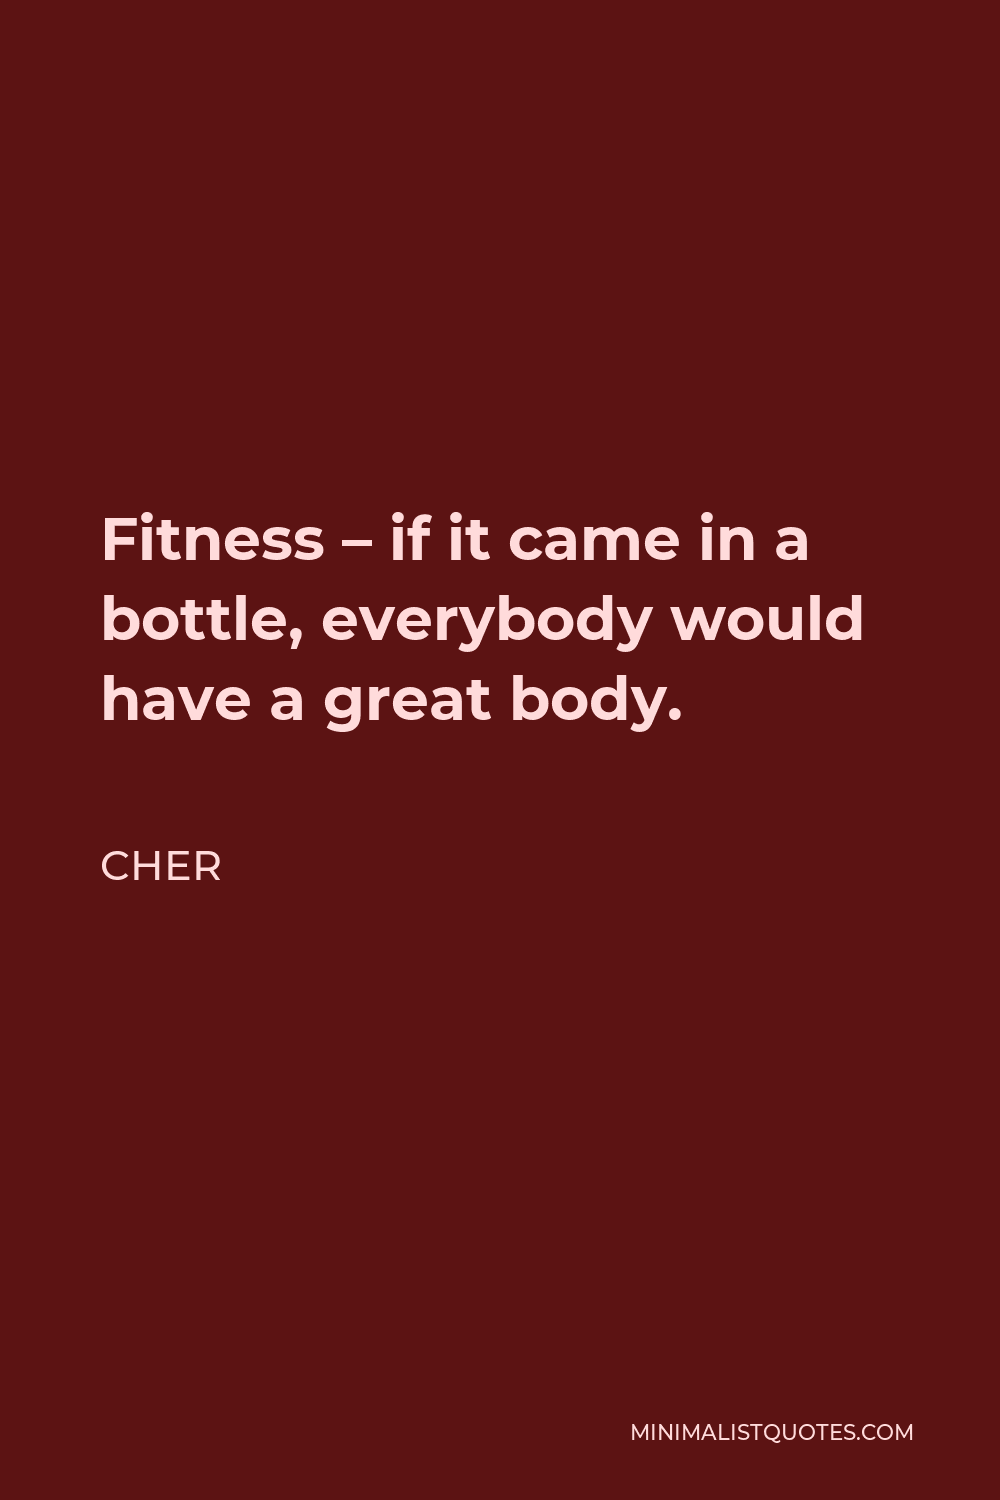 Cher Quote: Fitness - if it came in a bottle, everybody would have a ...